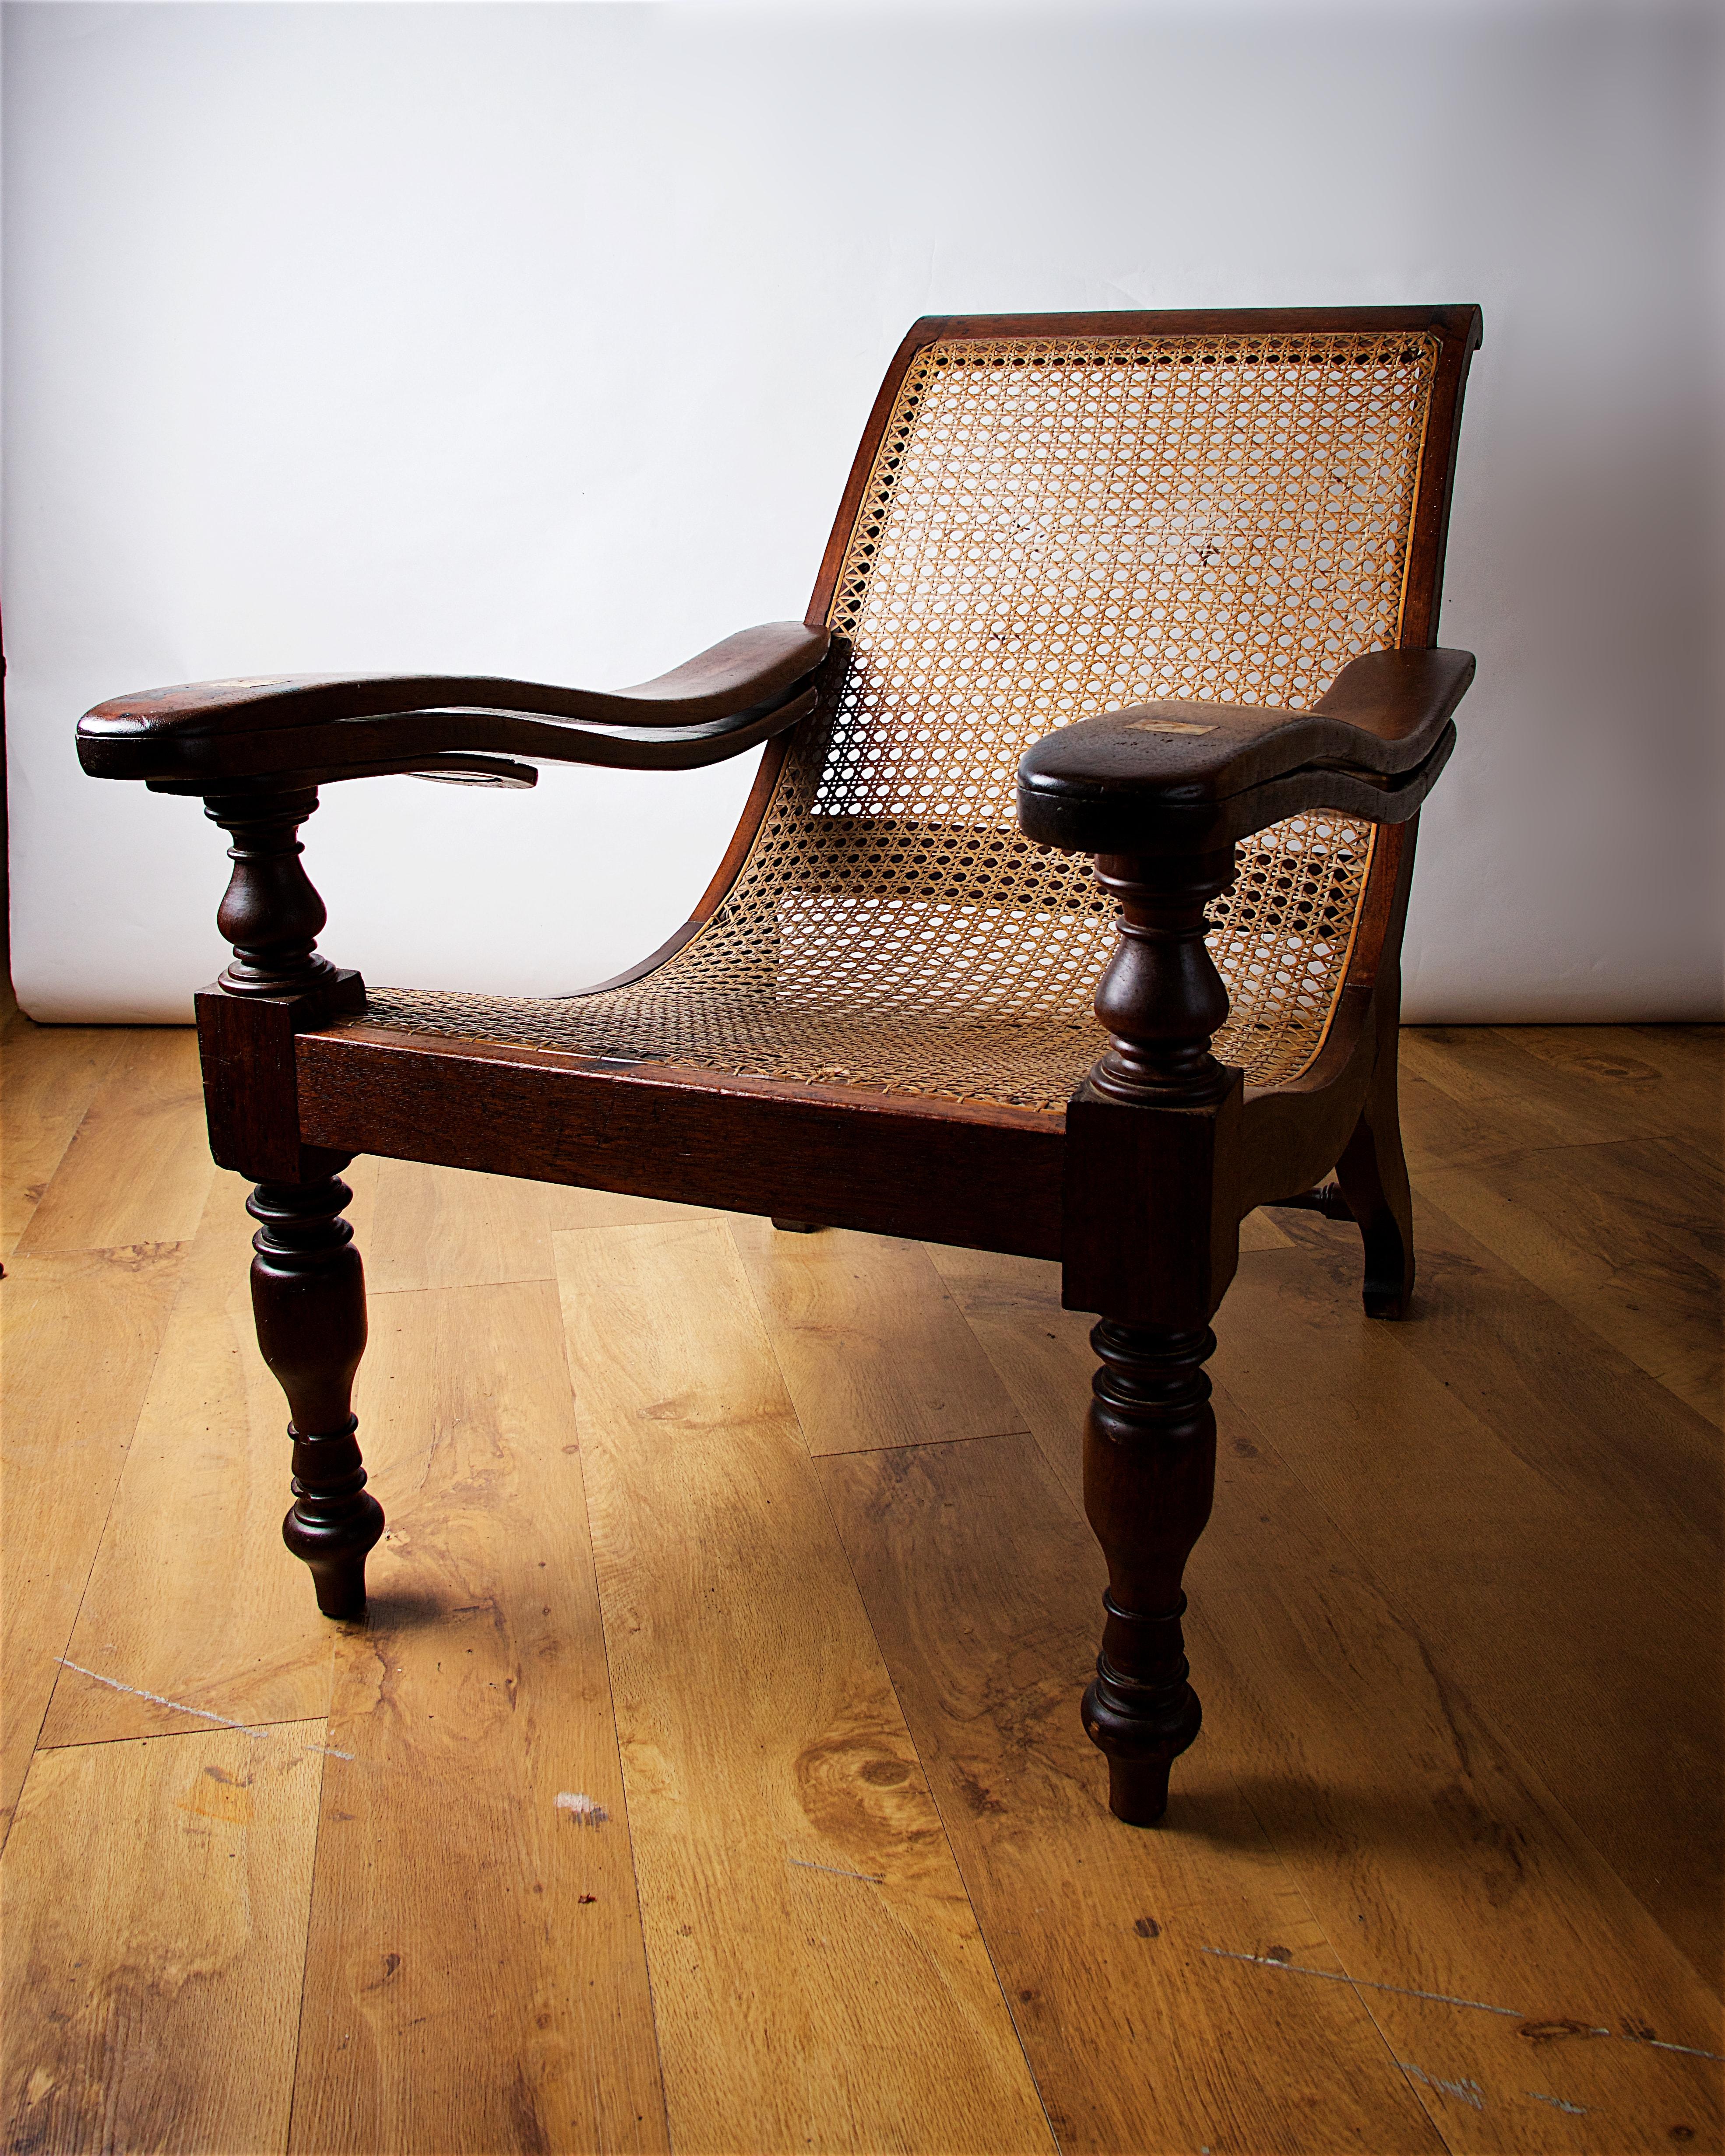 This teak and rattan plantation chair came from the family home of Hercules Linton, one of the nautical architects who designed the Cutty Sark. The chair was made in Columbo, Ceylon sometime in the Victorian era. 
Dimensions: D: 40in x W: 26.5in x